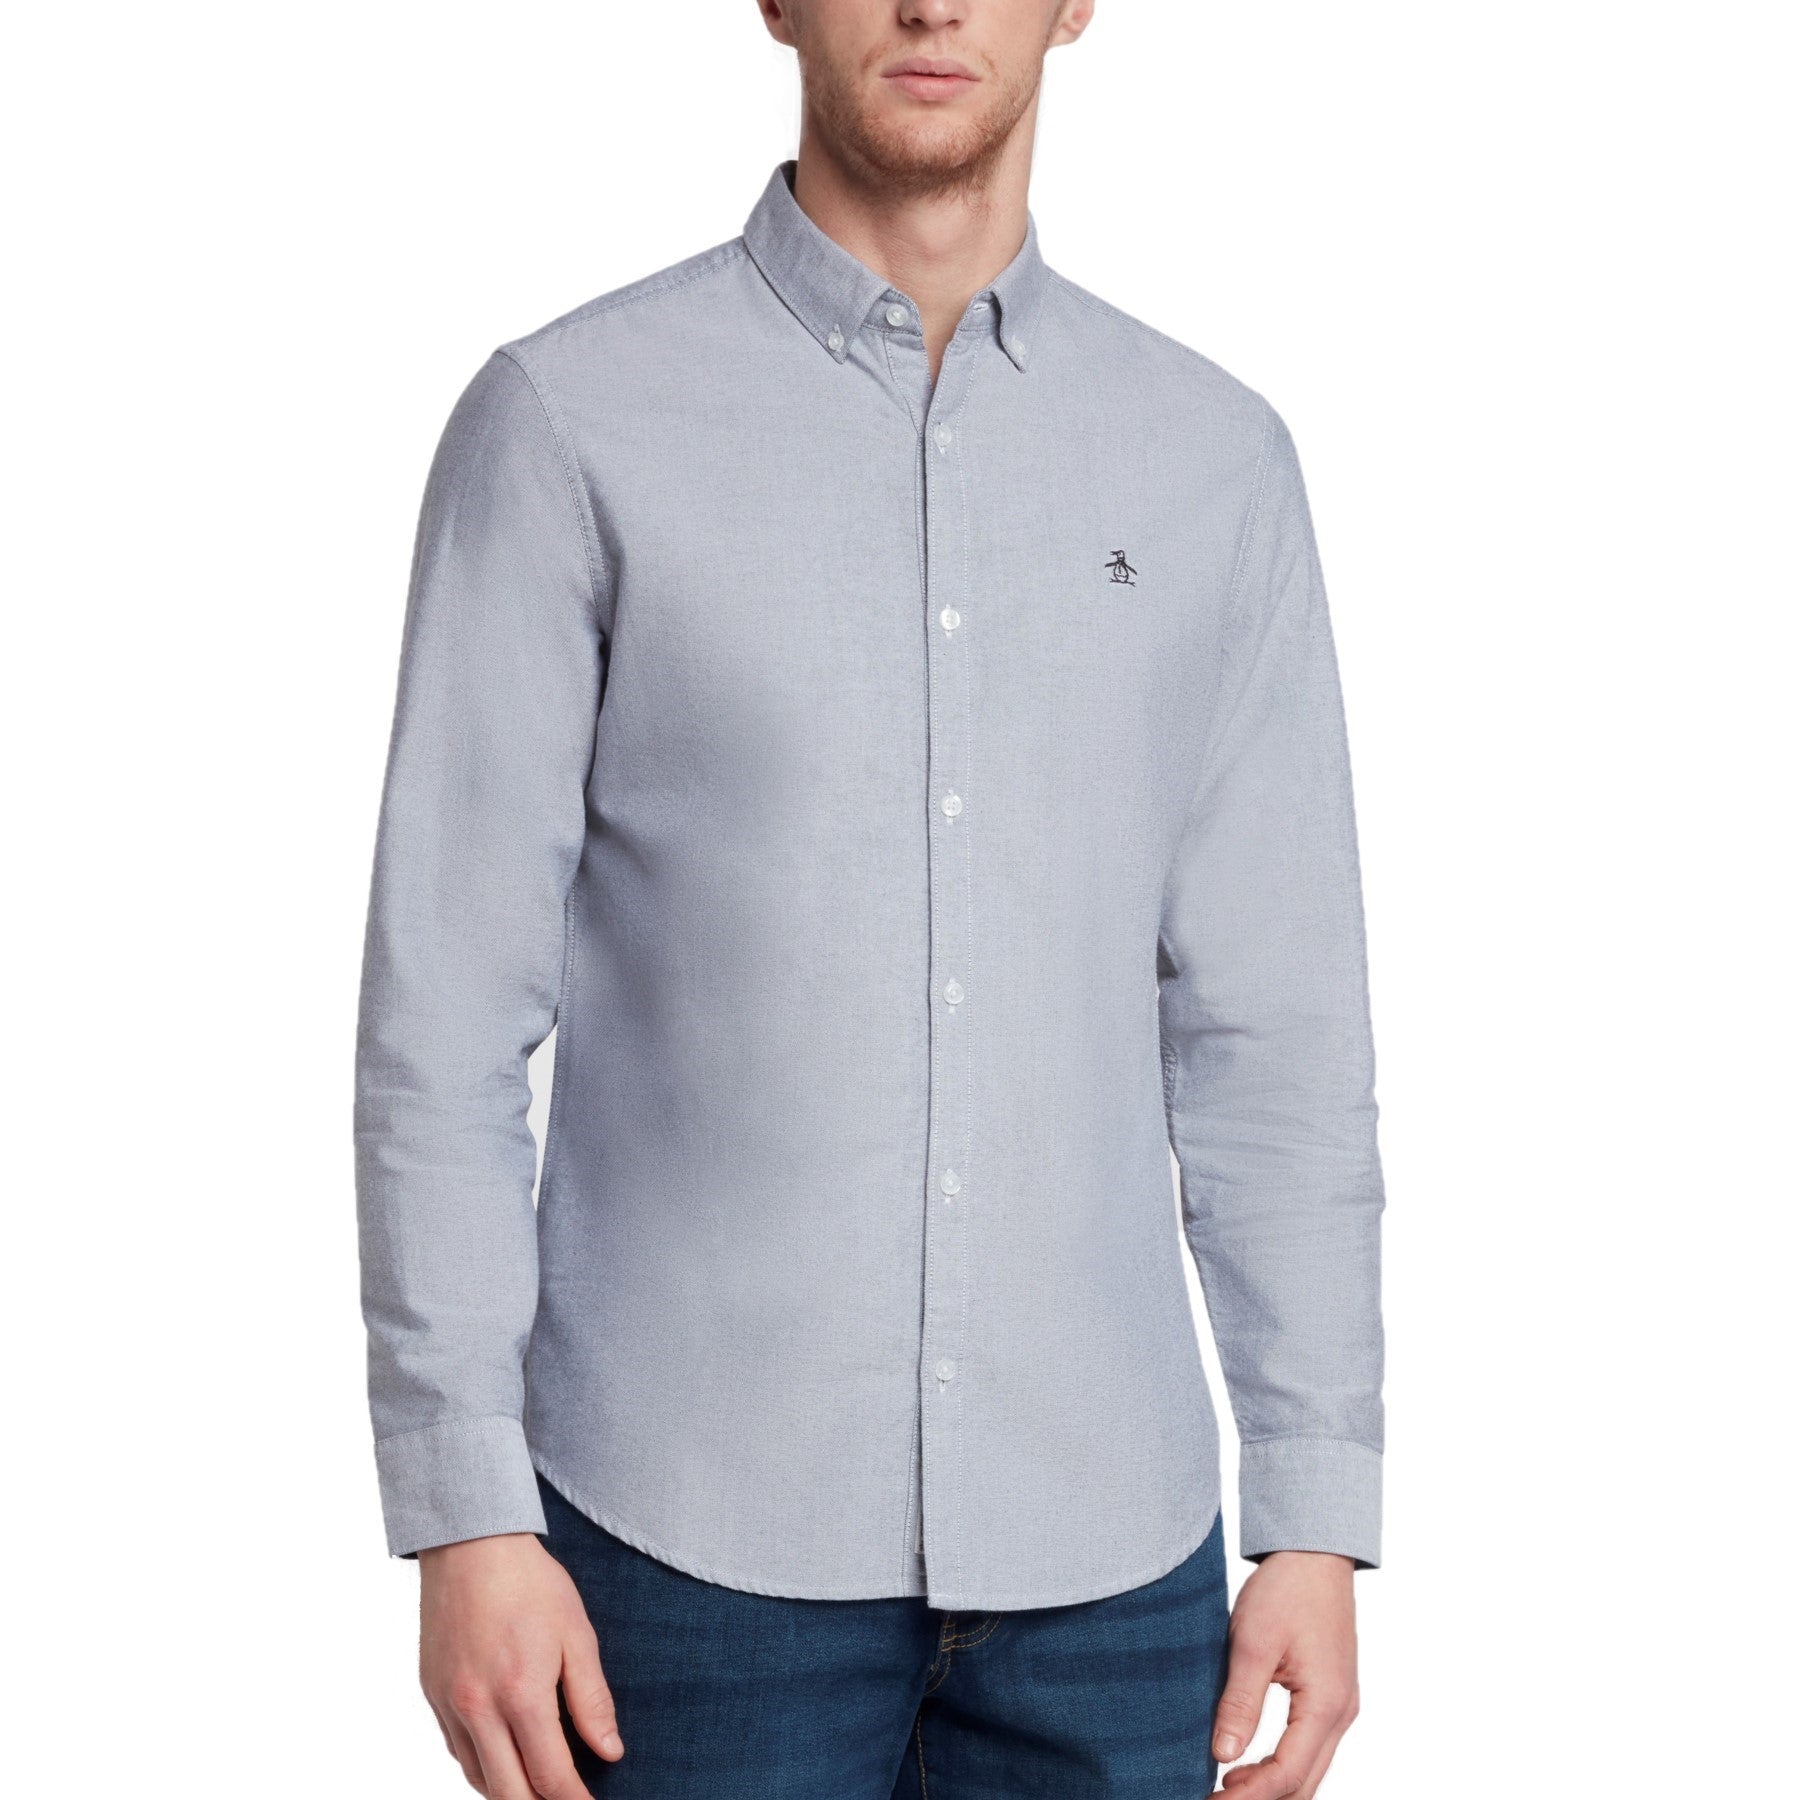 View Core Oxford Slim Fit Shirt In Grey information